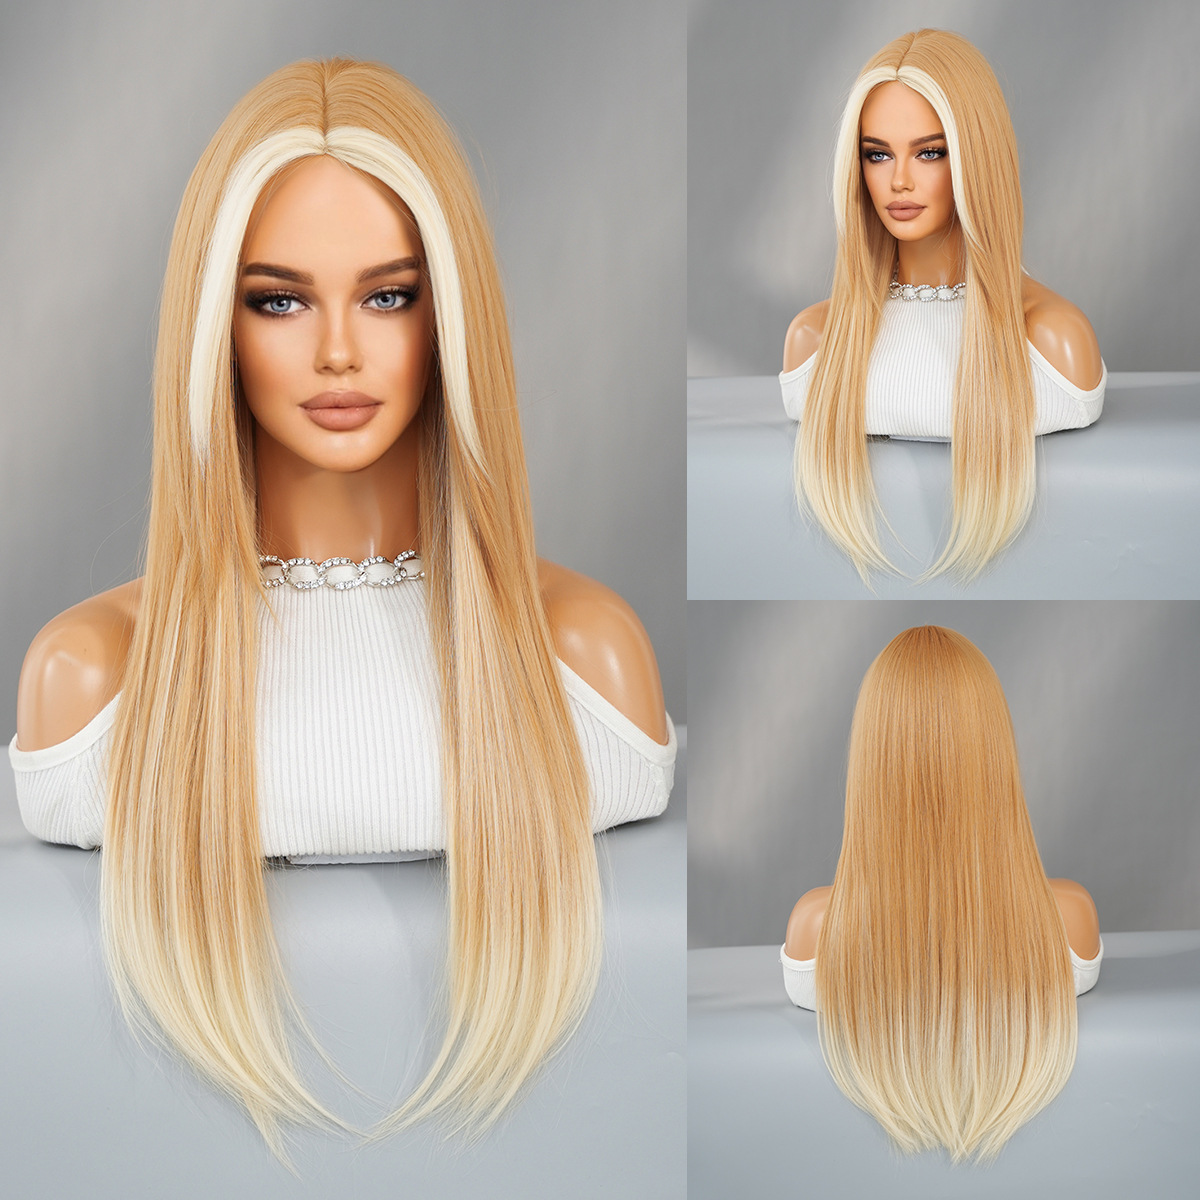 Stylish synthetic wig by Yinraohair with chic blonde highlights, showcasing long straight hair, fashionably designed and ready for use